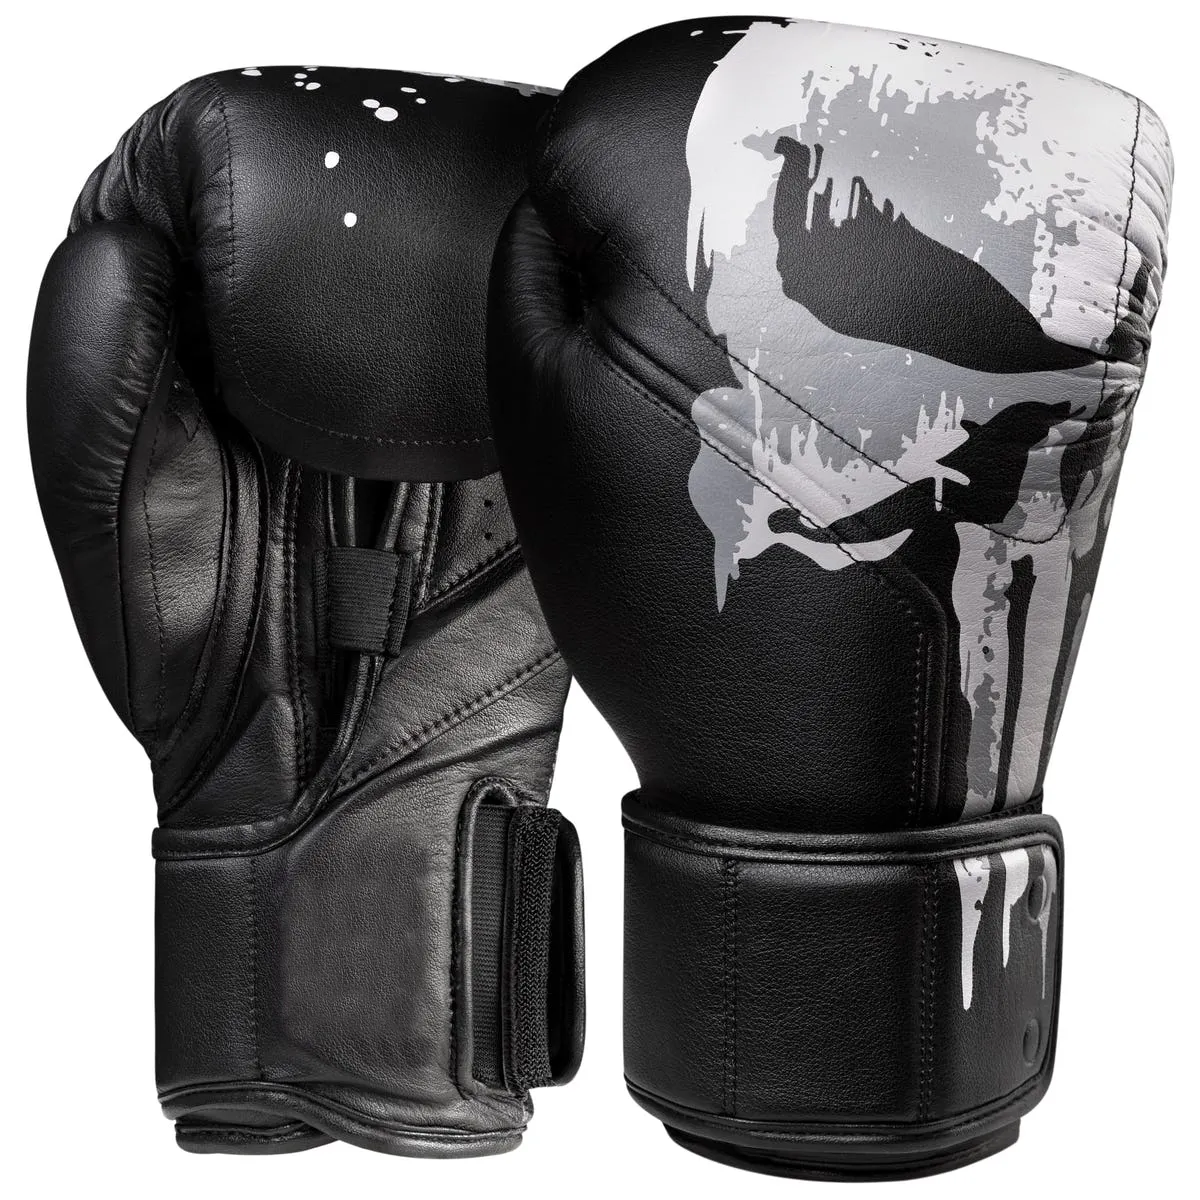 Wholesale personalized custom made Boxing gloves for Boxing Kickboxing Training Gloves